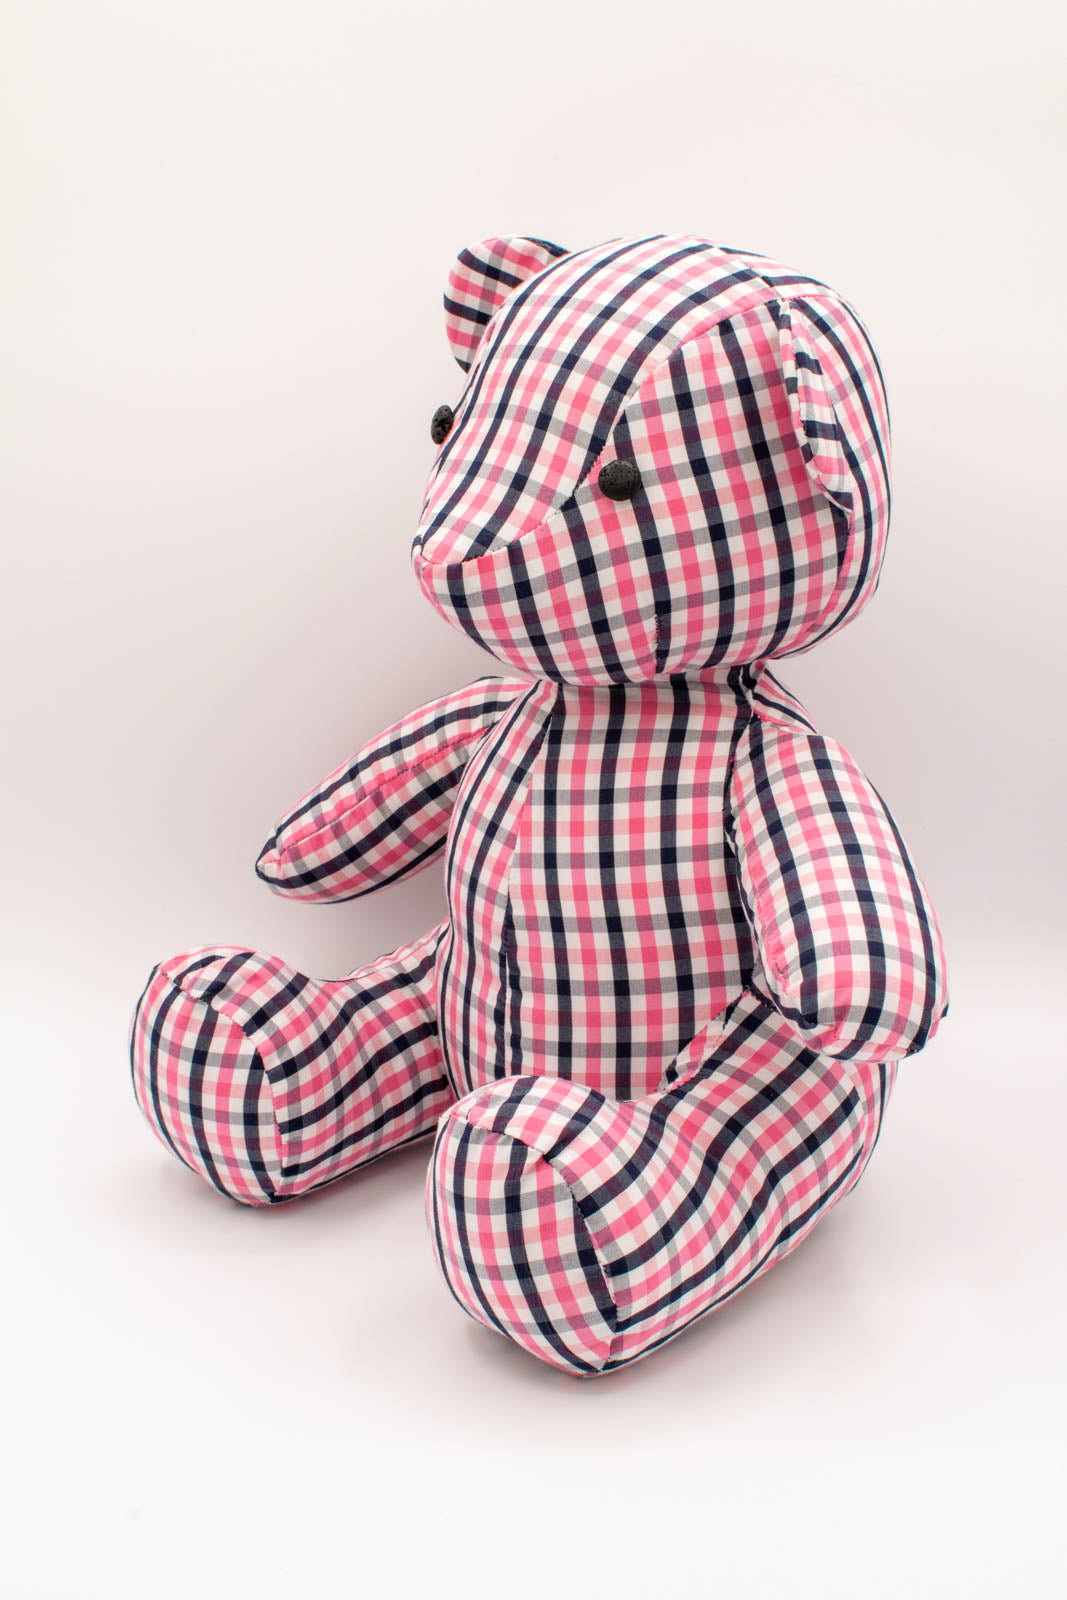 Blue and Pink Gingham Shirt Teddy Bear 3